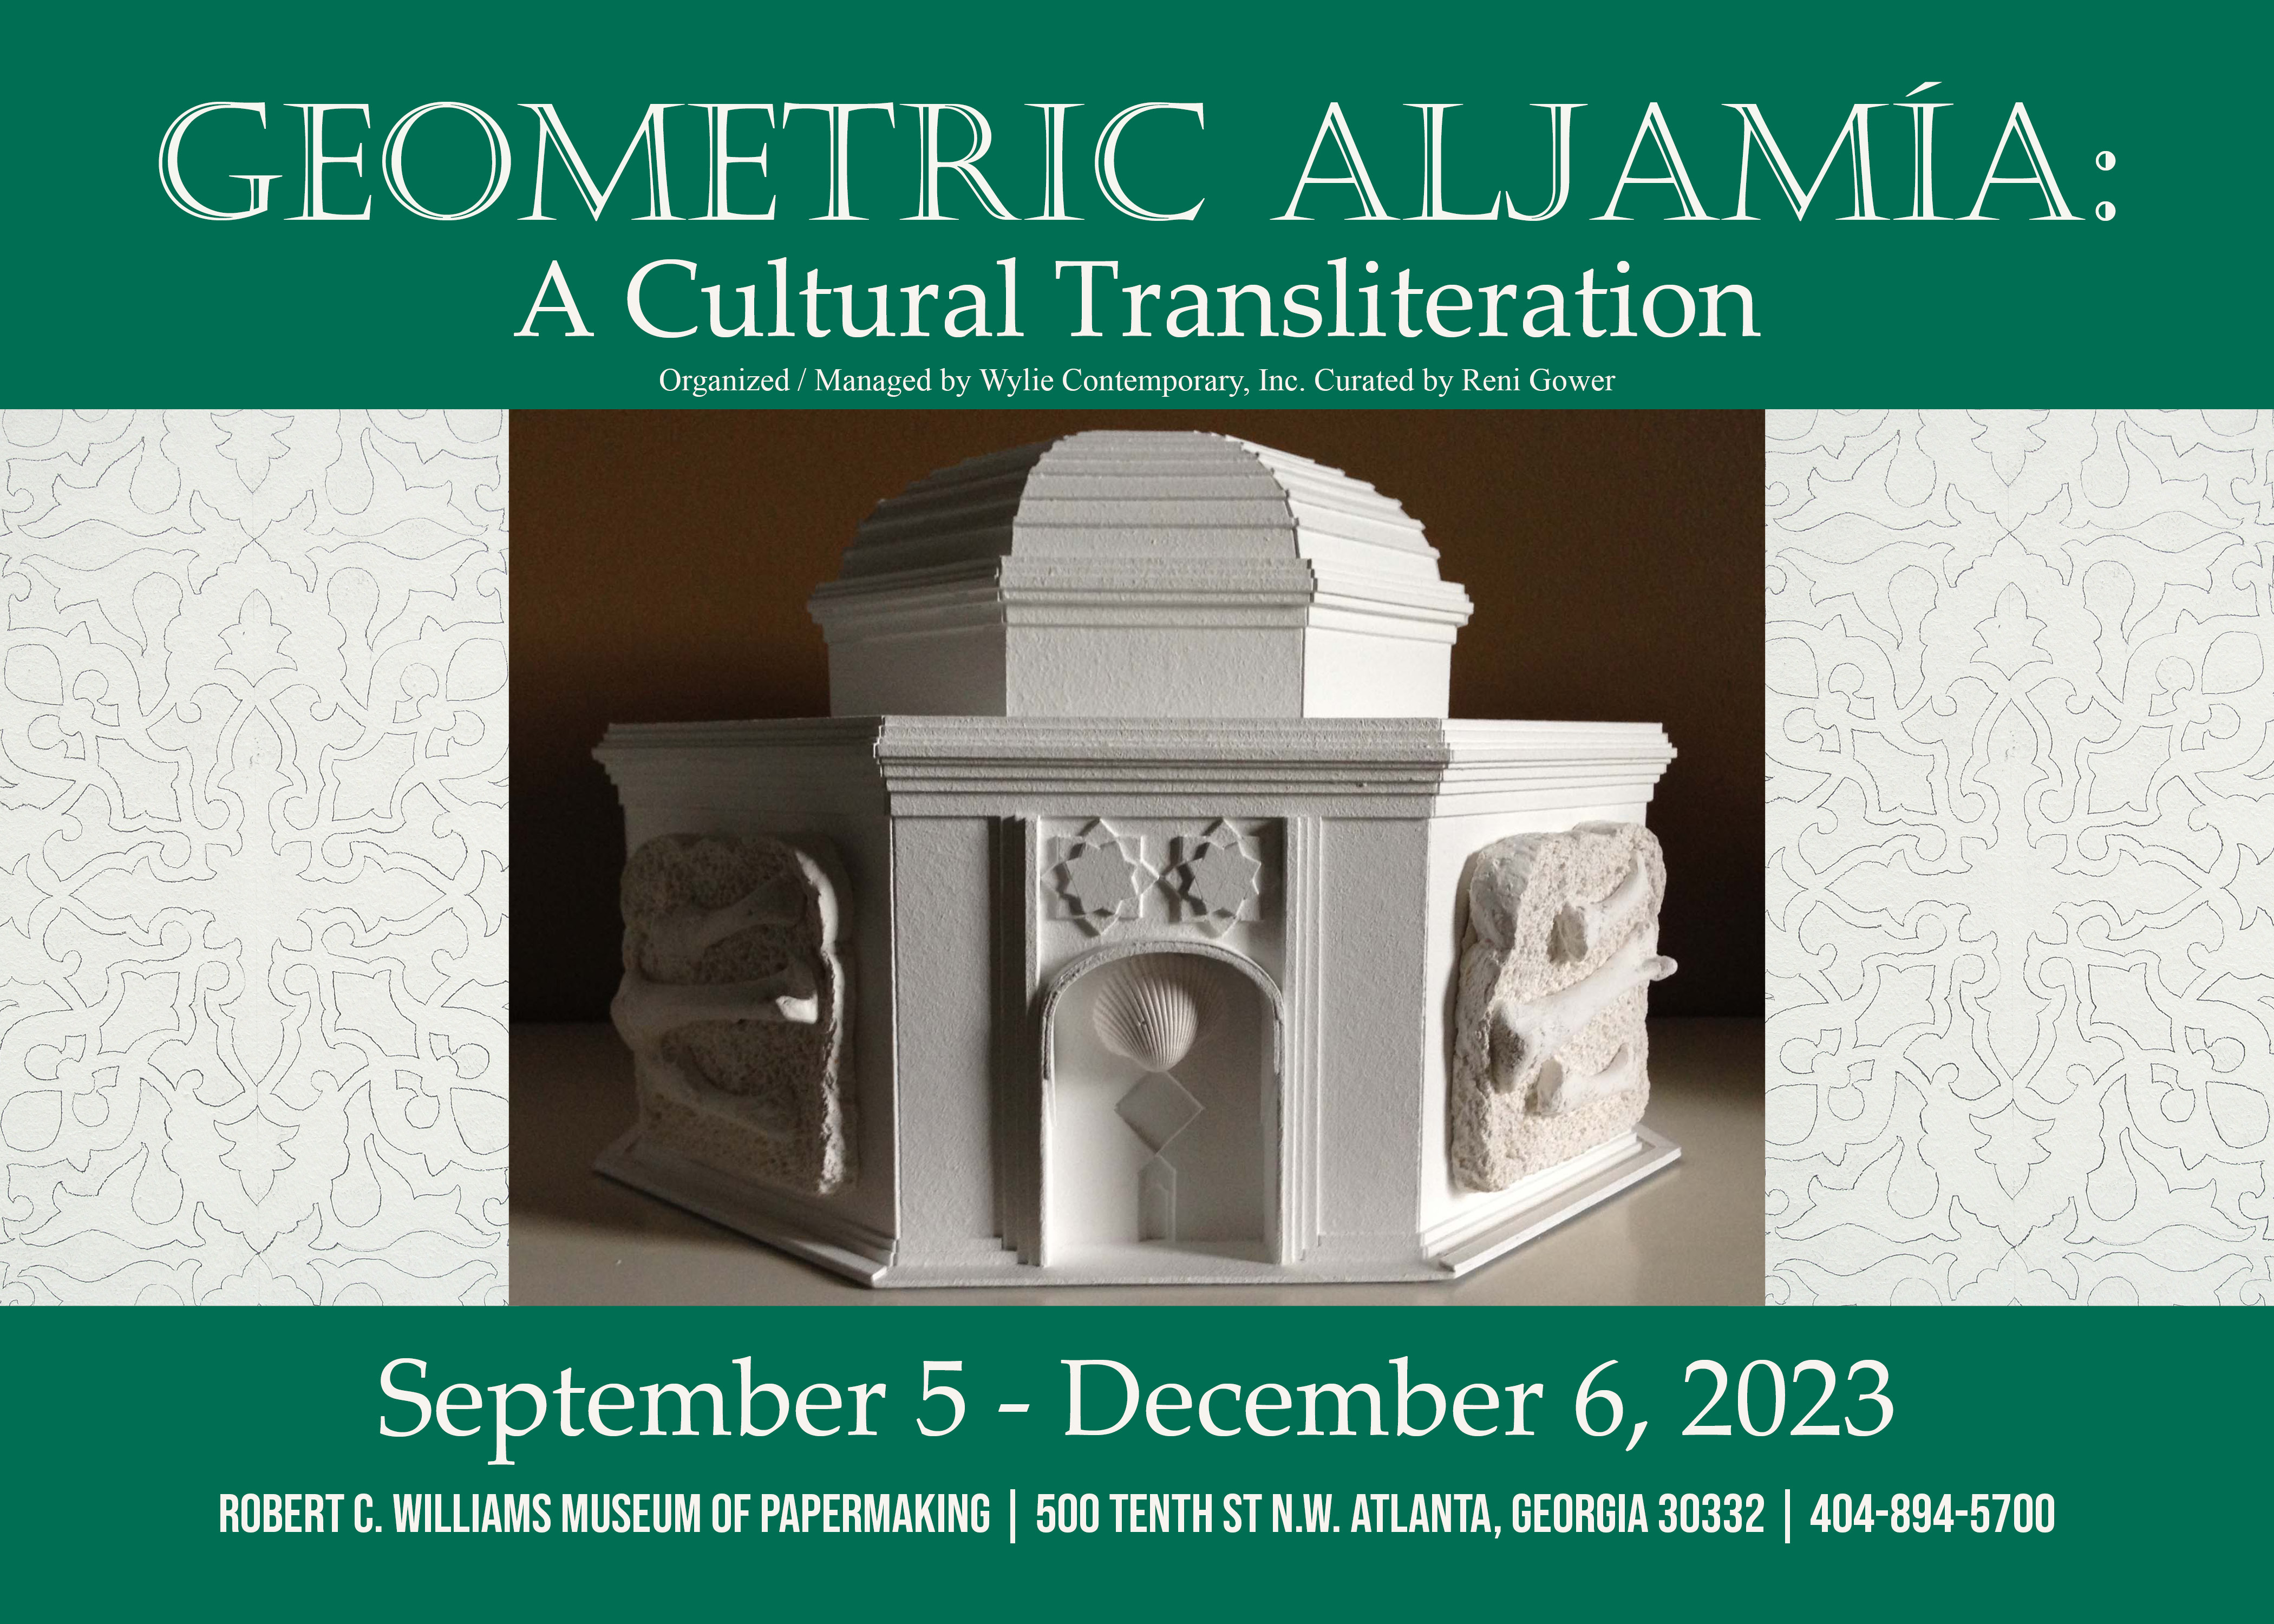 Two green strips of text at the top and bottom of the image provide the exhibition title and exhibition dates. Between the strips is a photograph of a paper architectural sculpture by Jorqe Benitez. The structure is an all white hexagon with a dome roof reminiscent of a mosque. Above the door are two stars and on the walls to the left and right of the door is a casting of a slice of bread with bones lying on the slice. The photograph is surrounded on the left and right with arabesque patterns traced on a white background with graphite pencil.